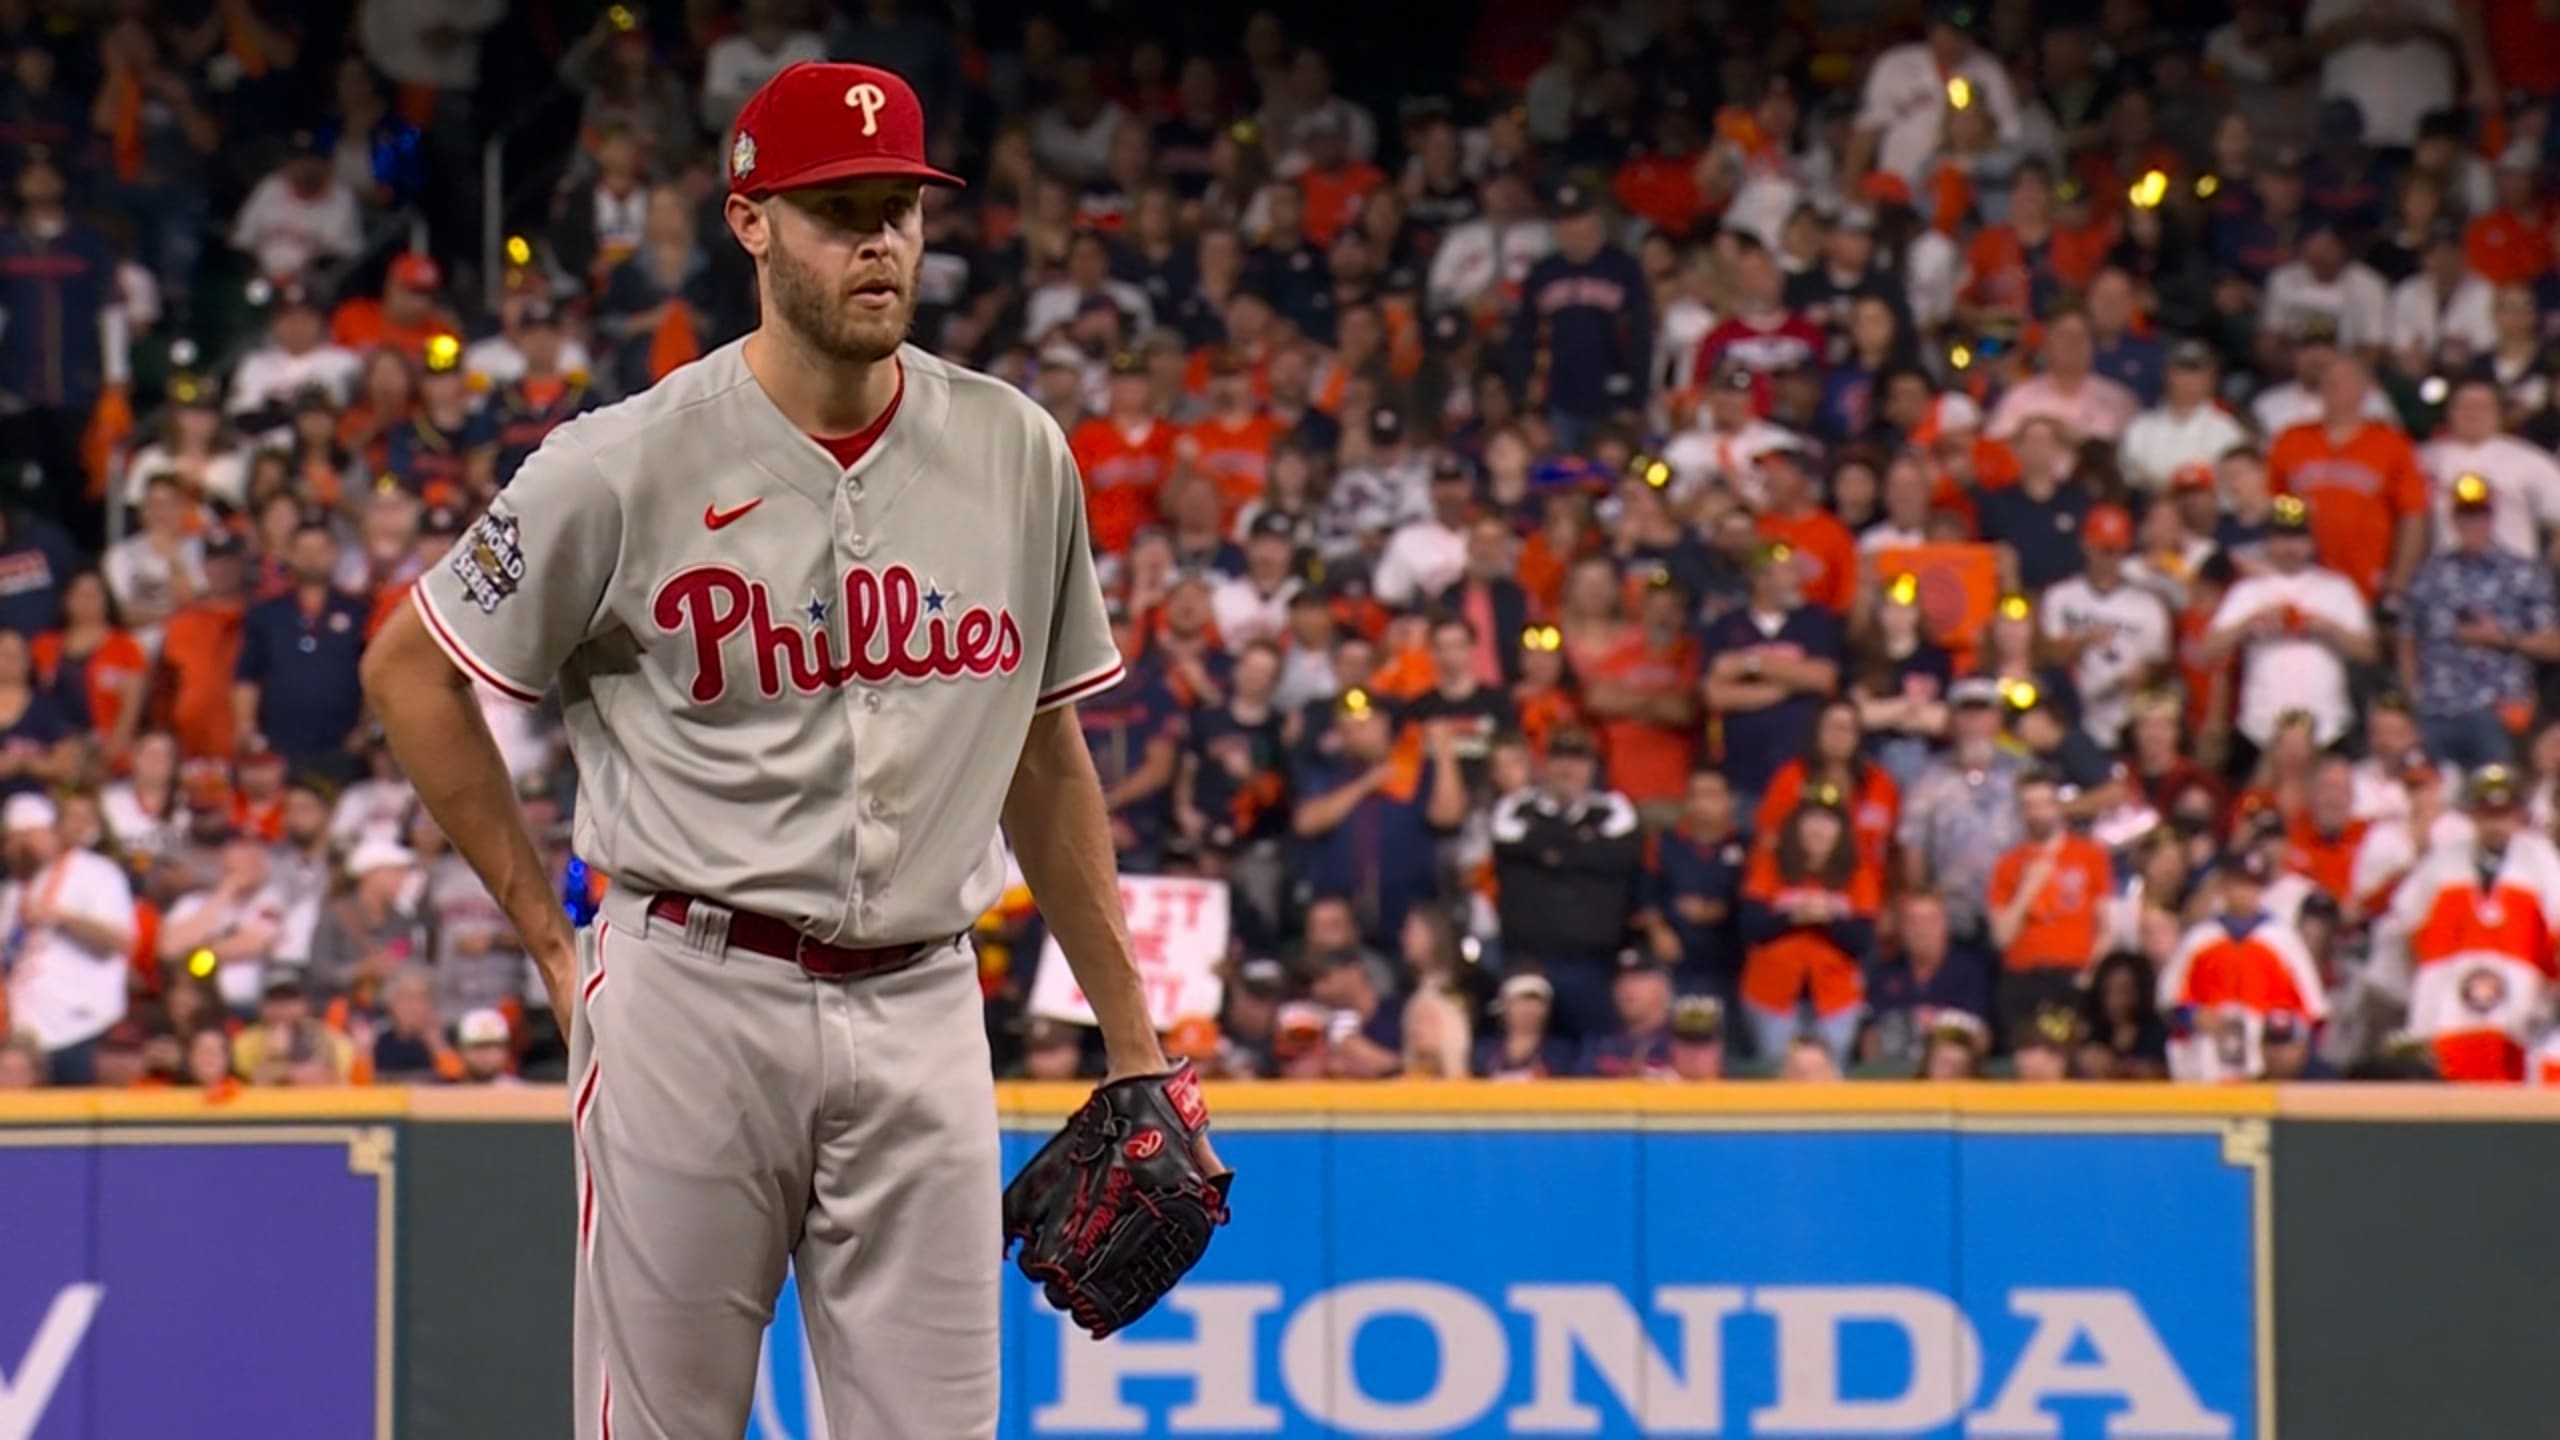 2022 World Series teed up: Bryce Harper, Phillies to face Astros